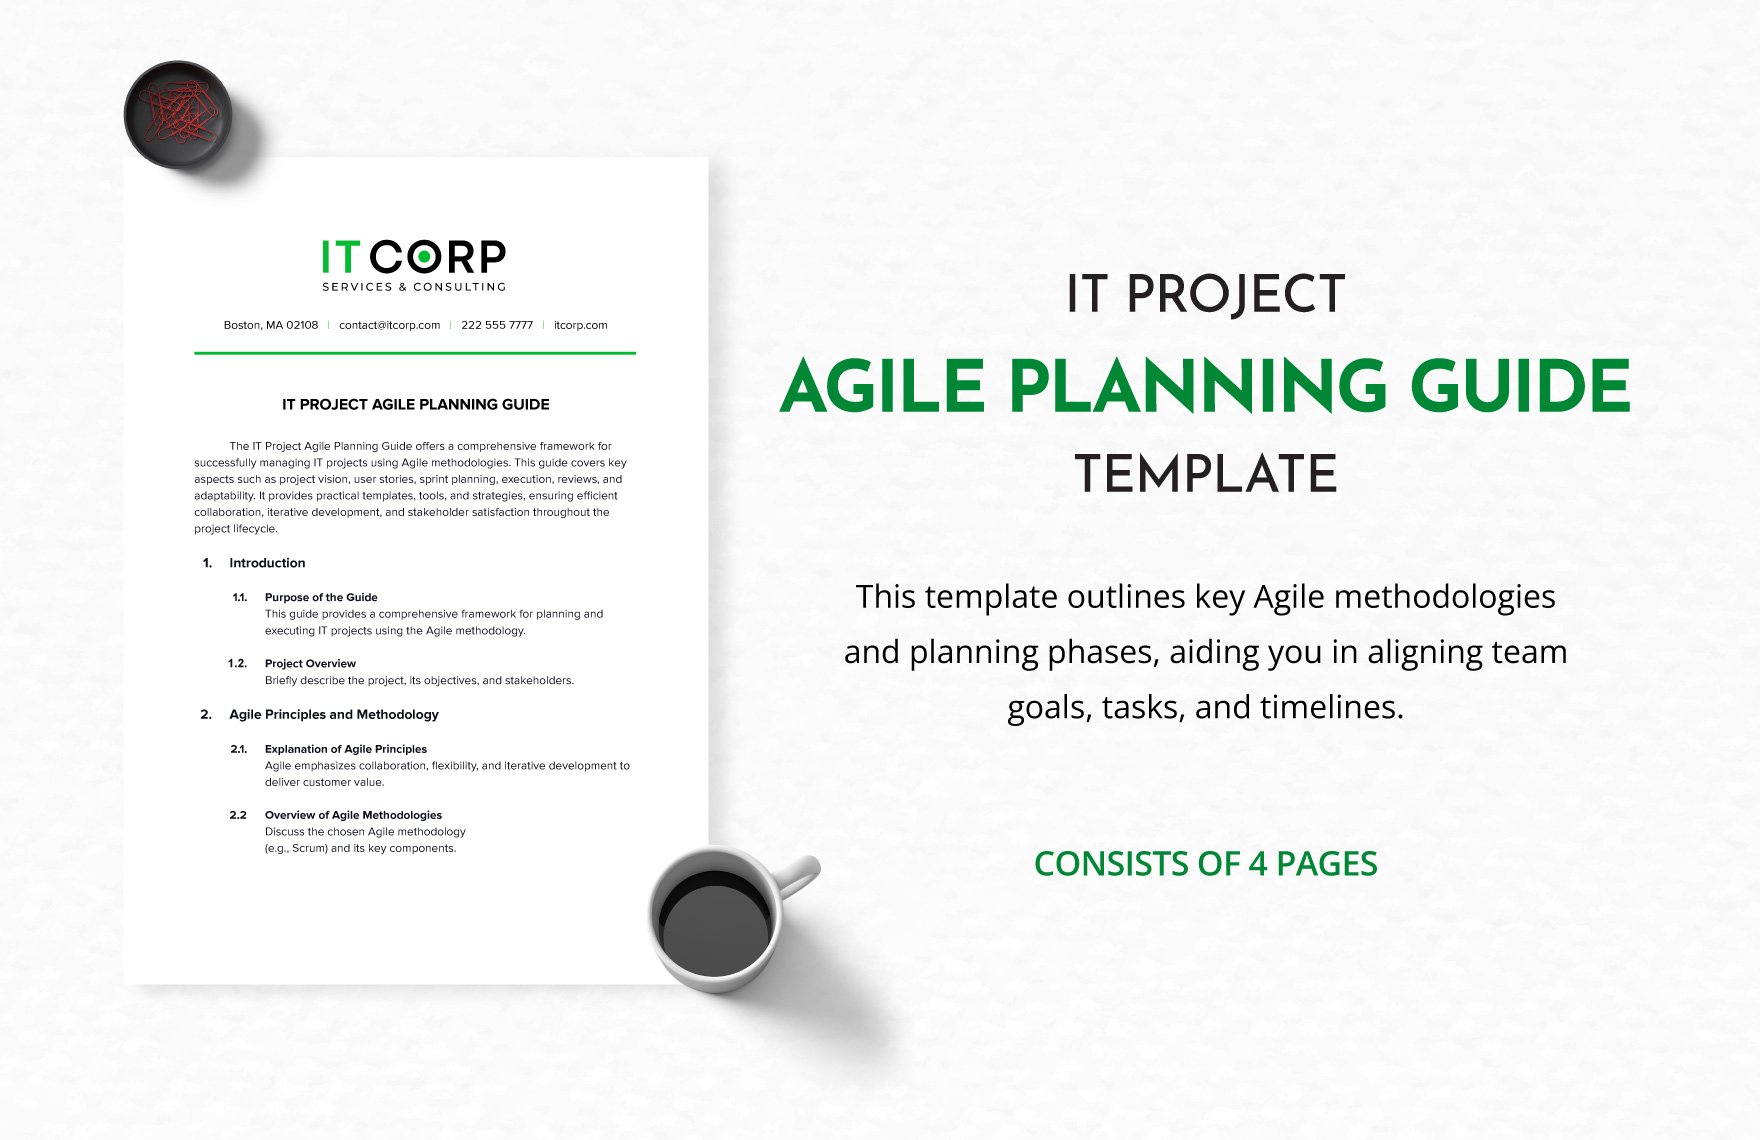 IT Project Agile Planning Guide Template